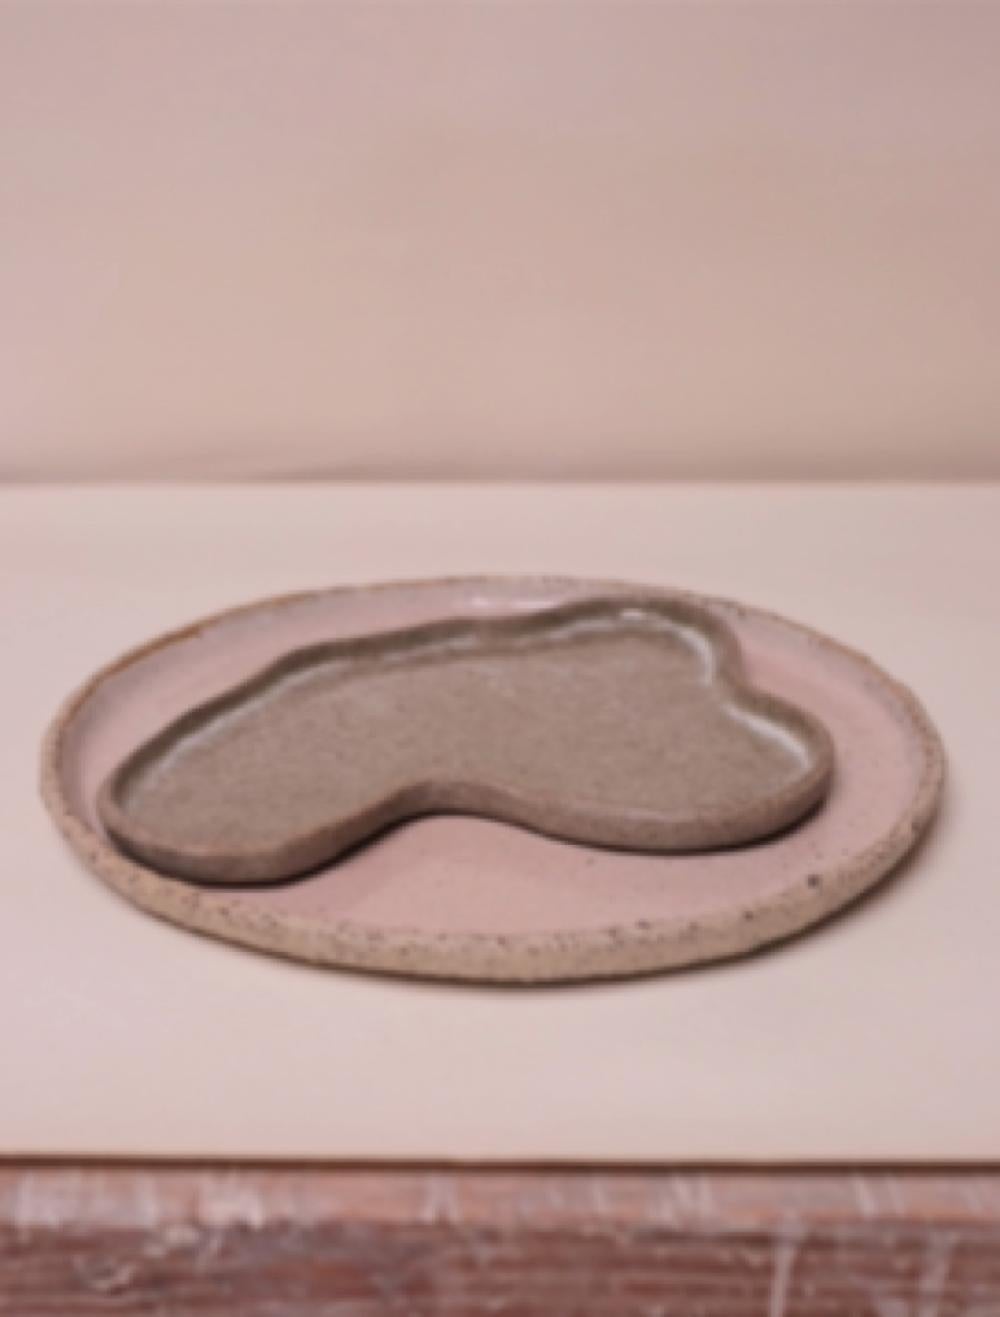 Hand-Crafted Round Plate in Stracciatella Clay and Soft Creamy Pink Glaze